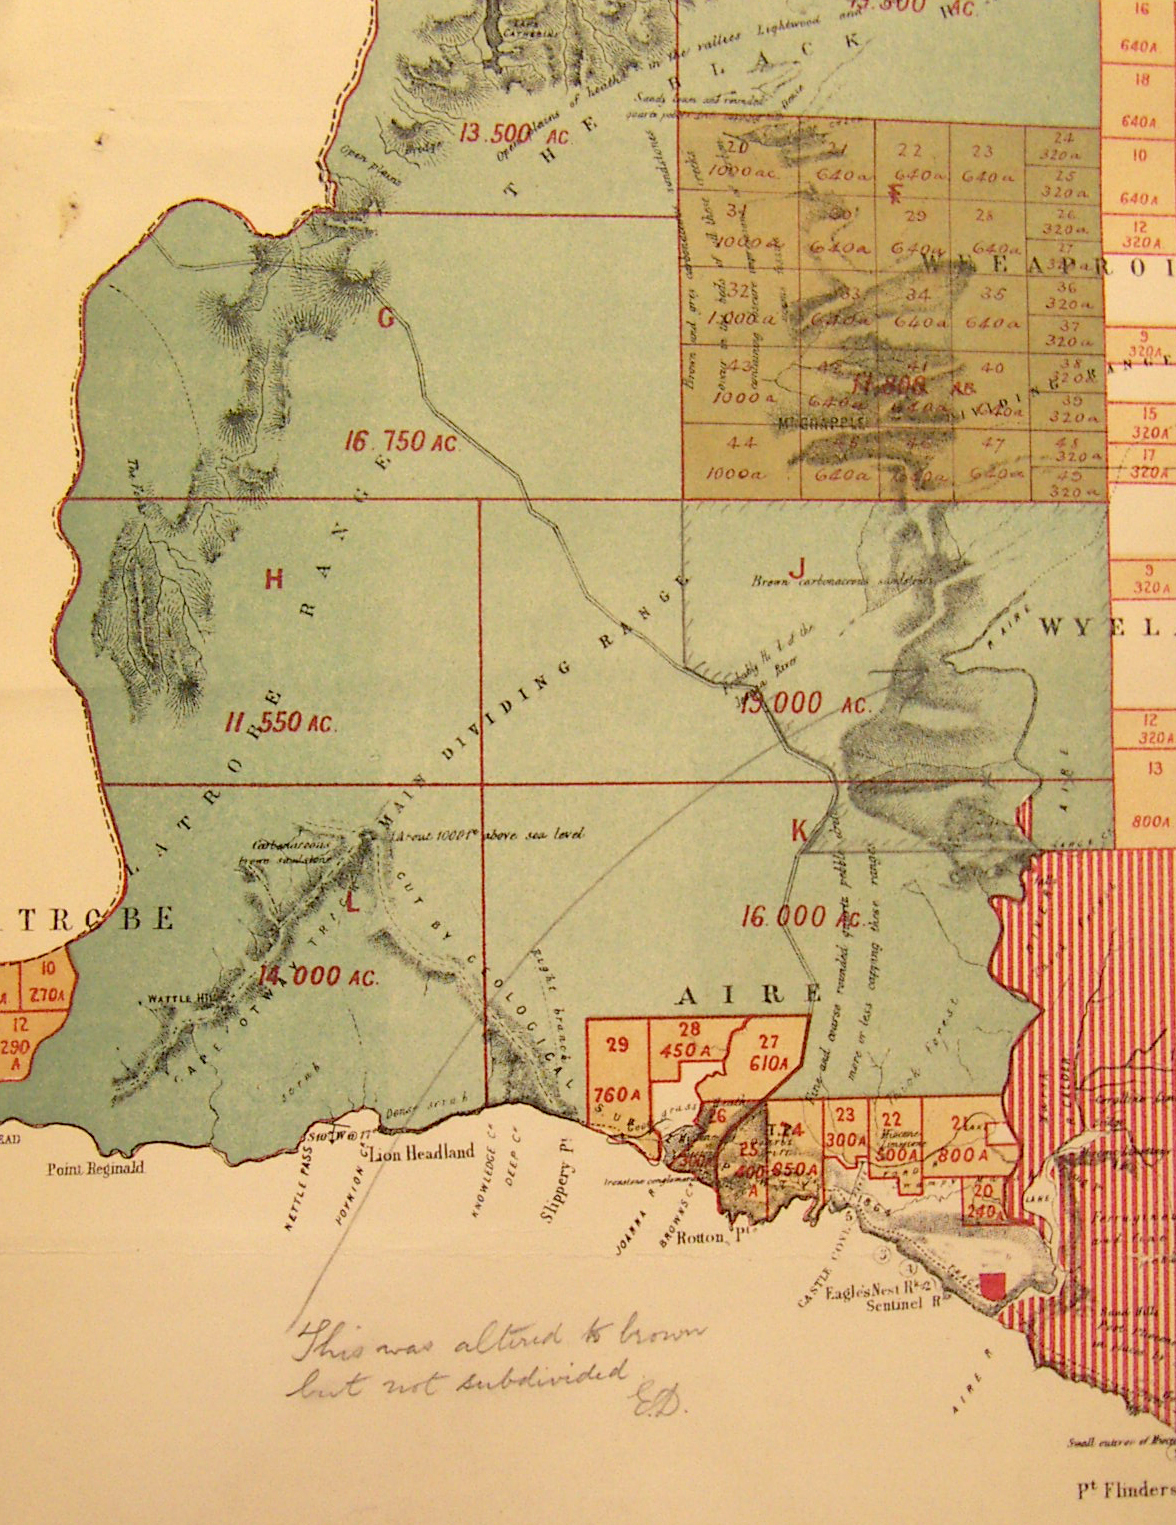 Fragment of Land Act 1884 map